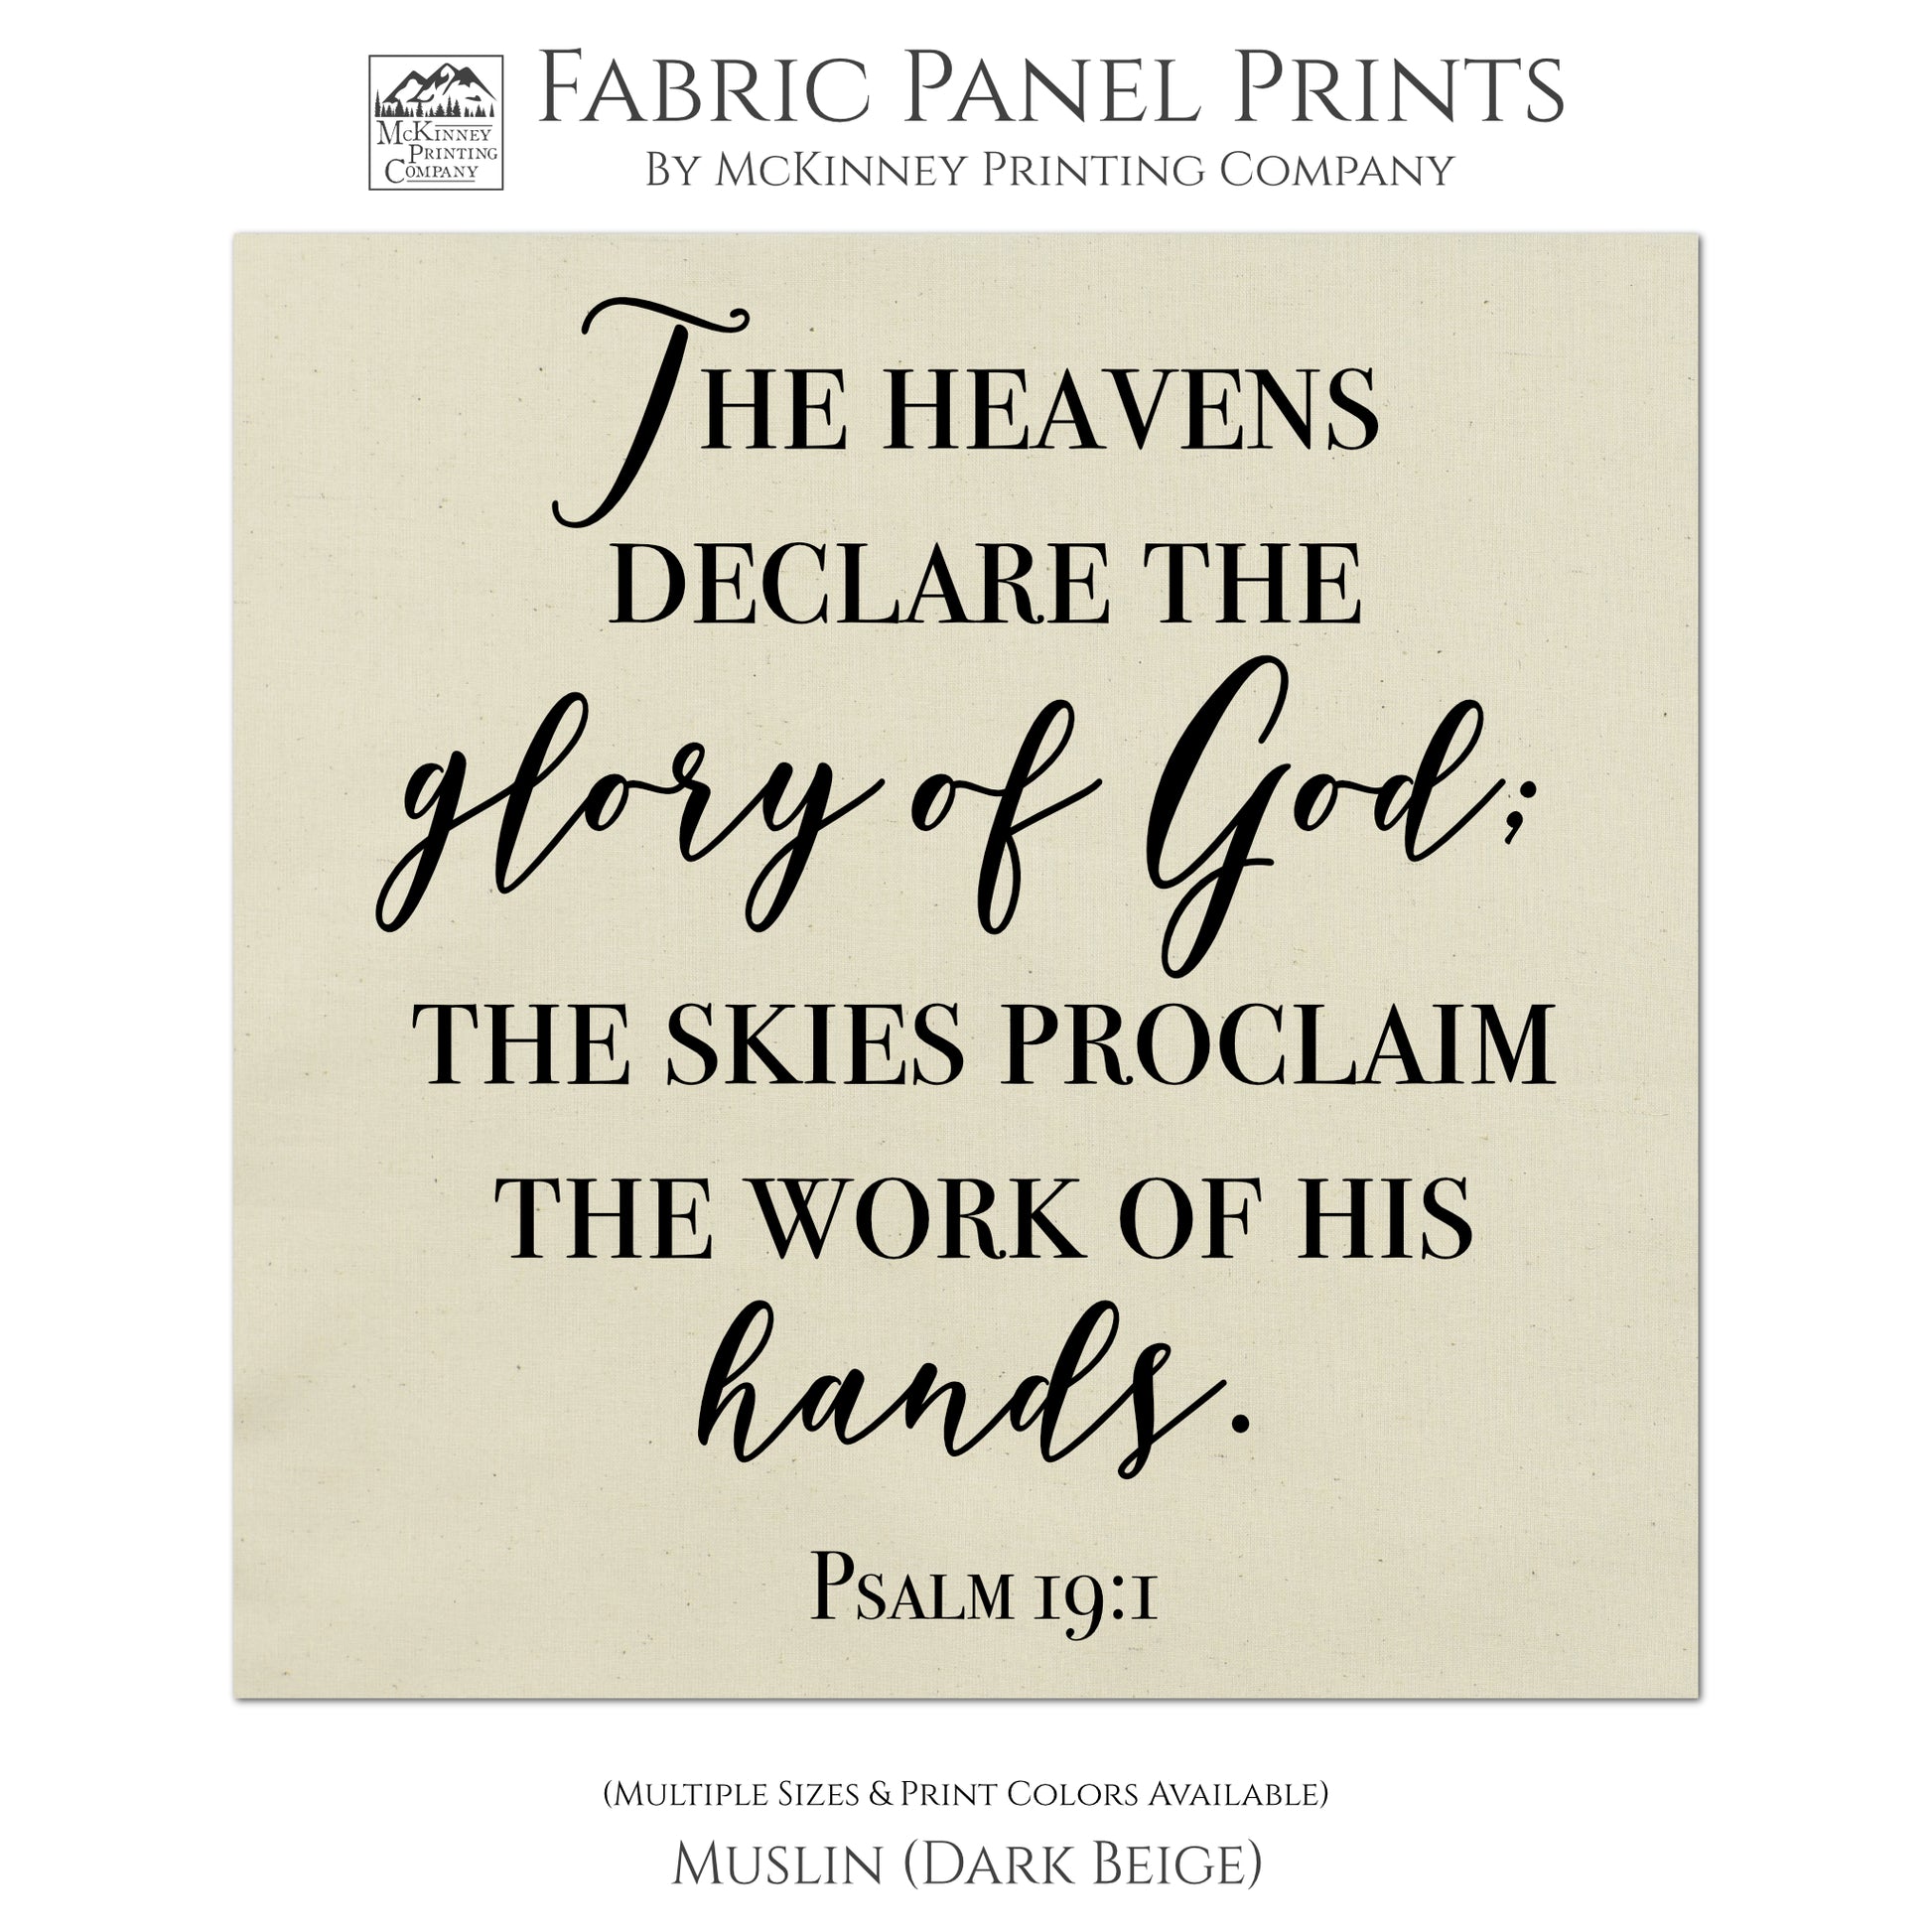 The heavens declare the glory of God; the sky's proclaim the work of his hands - Psalm 19:1 - Religious Cotton Fabric, Large Print Quilt Block - Muslin